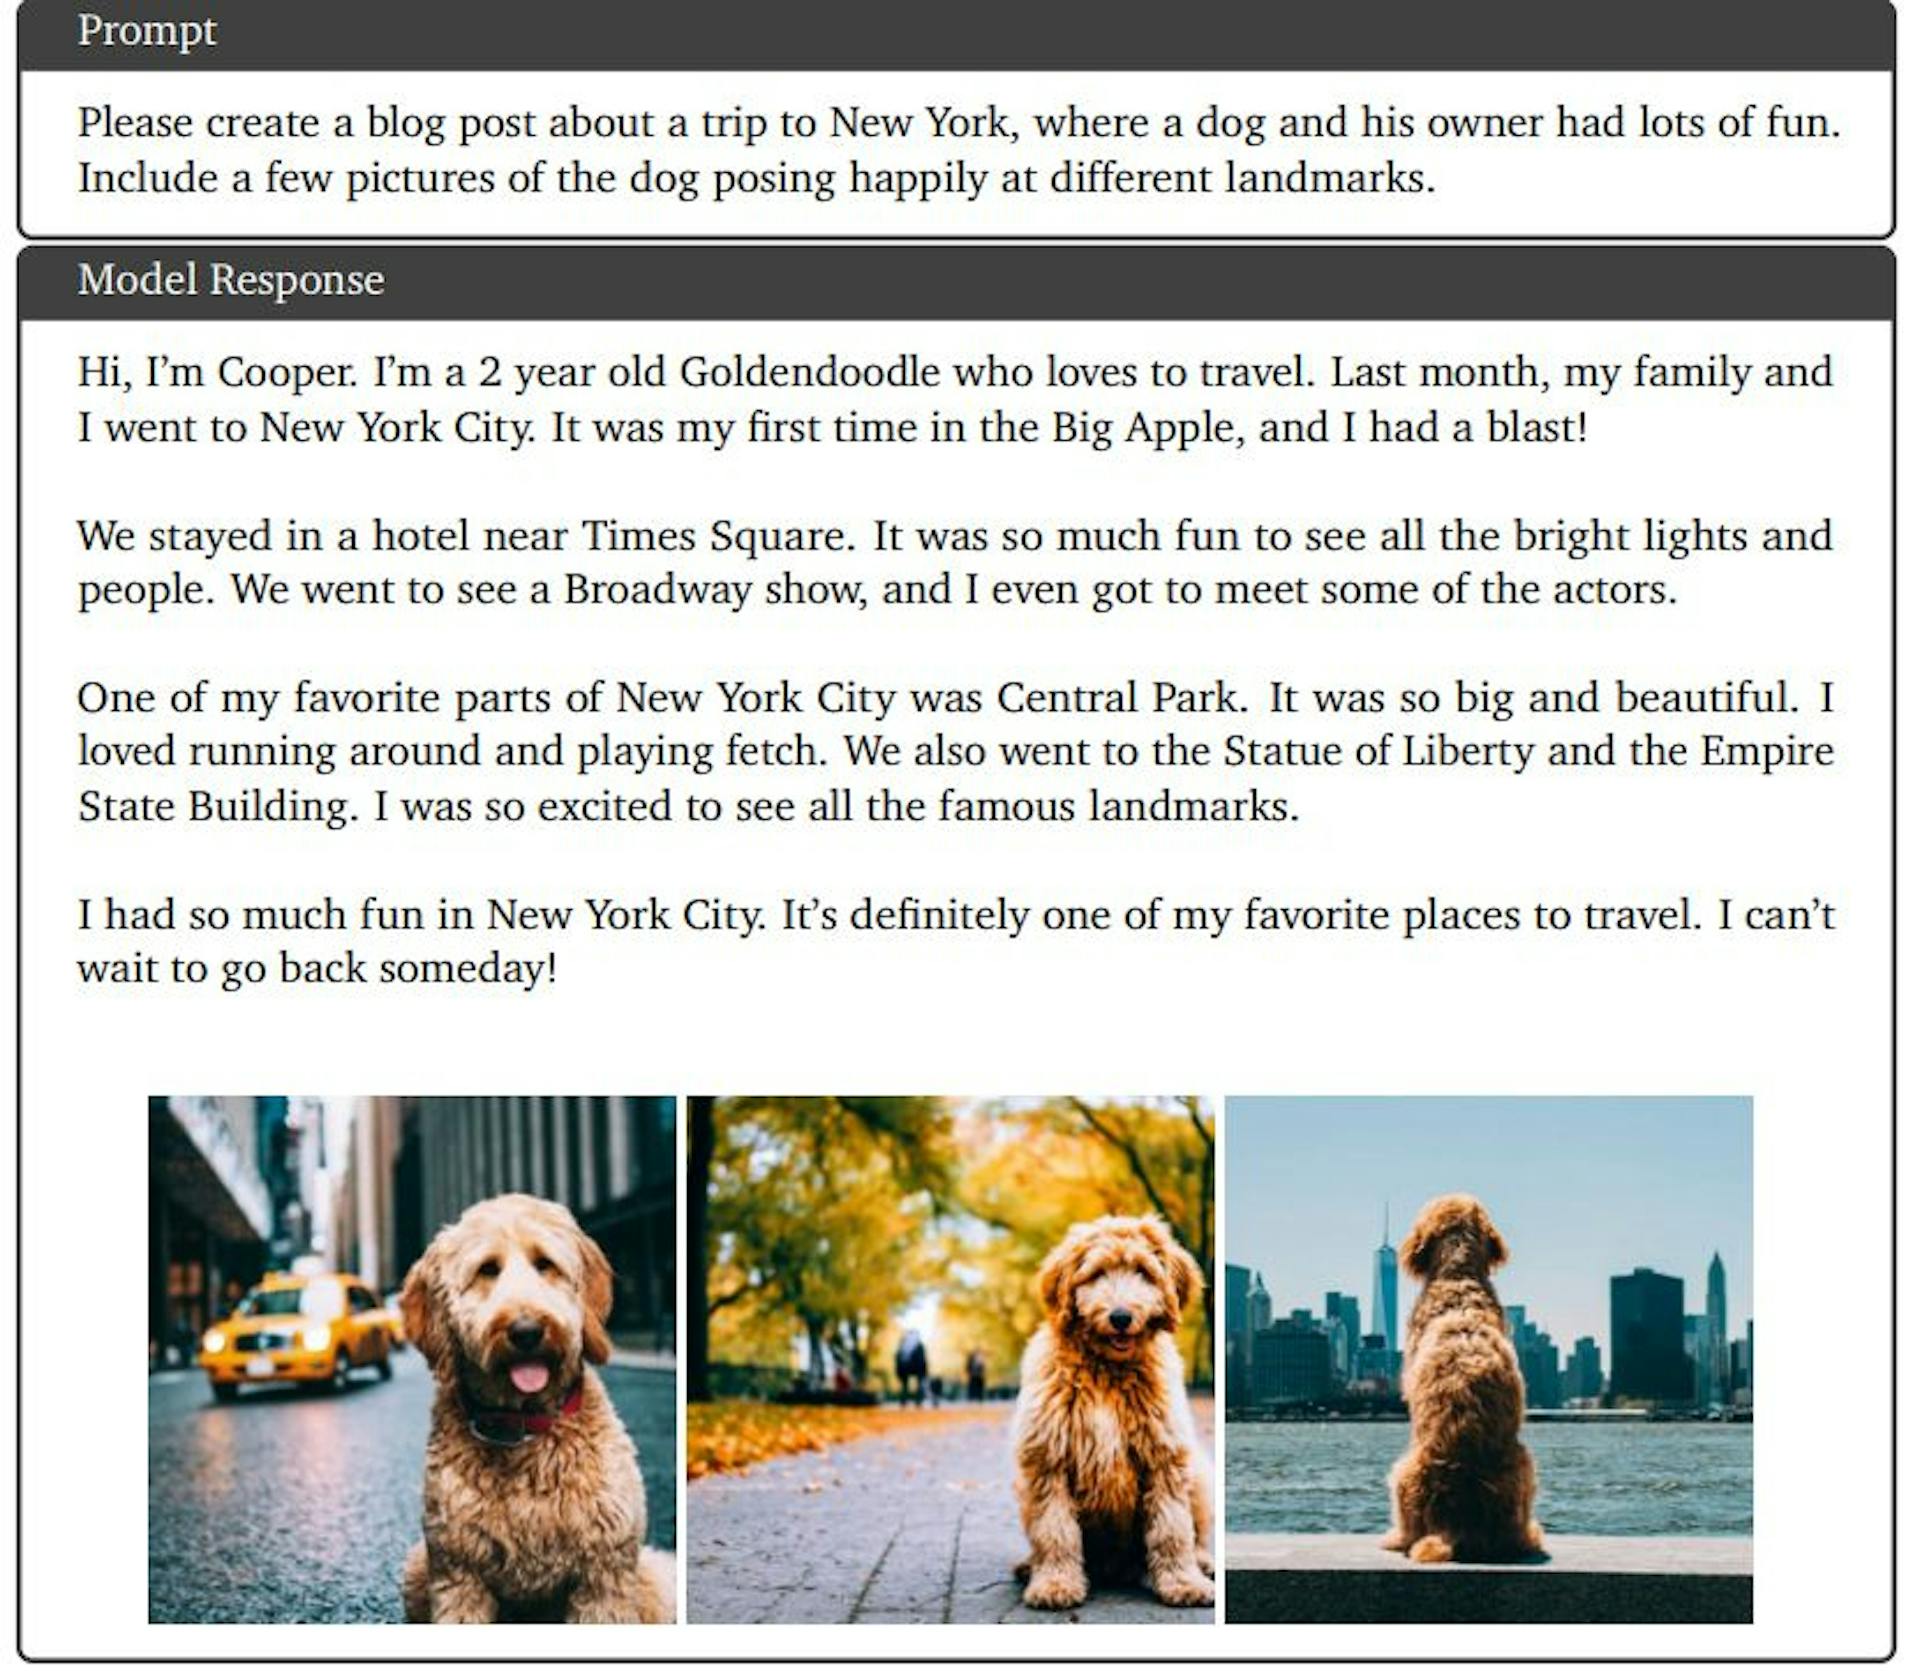 Figure 10 | Generating interleaved text and images. The model is able to follow the instructions of generating a blog post with images closely related to the text and with dog images showing high levels of consistency across all images.